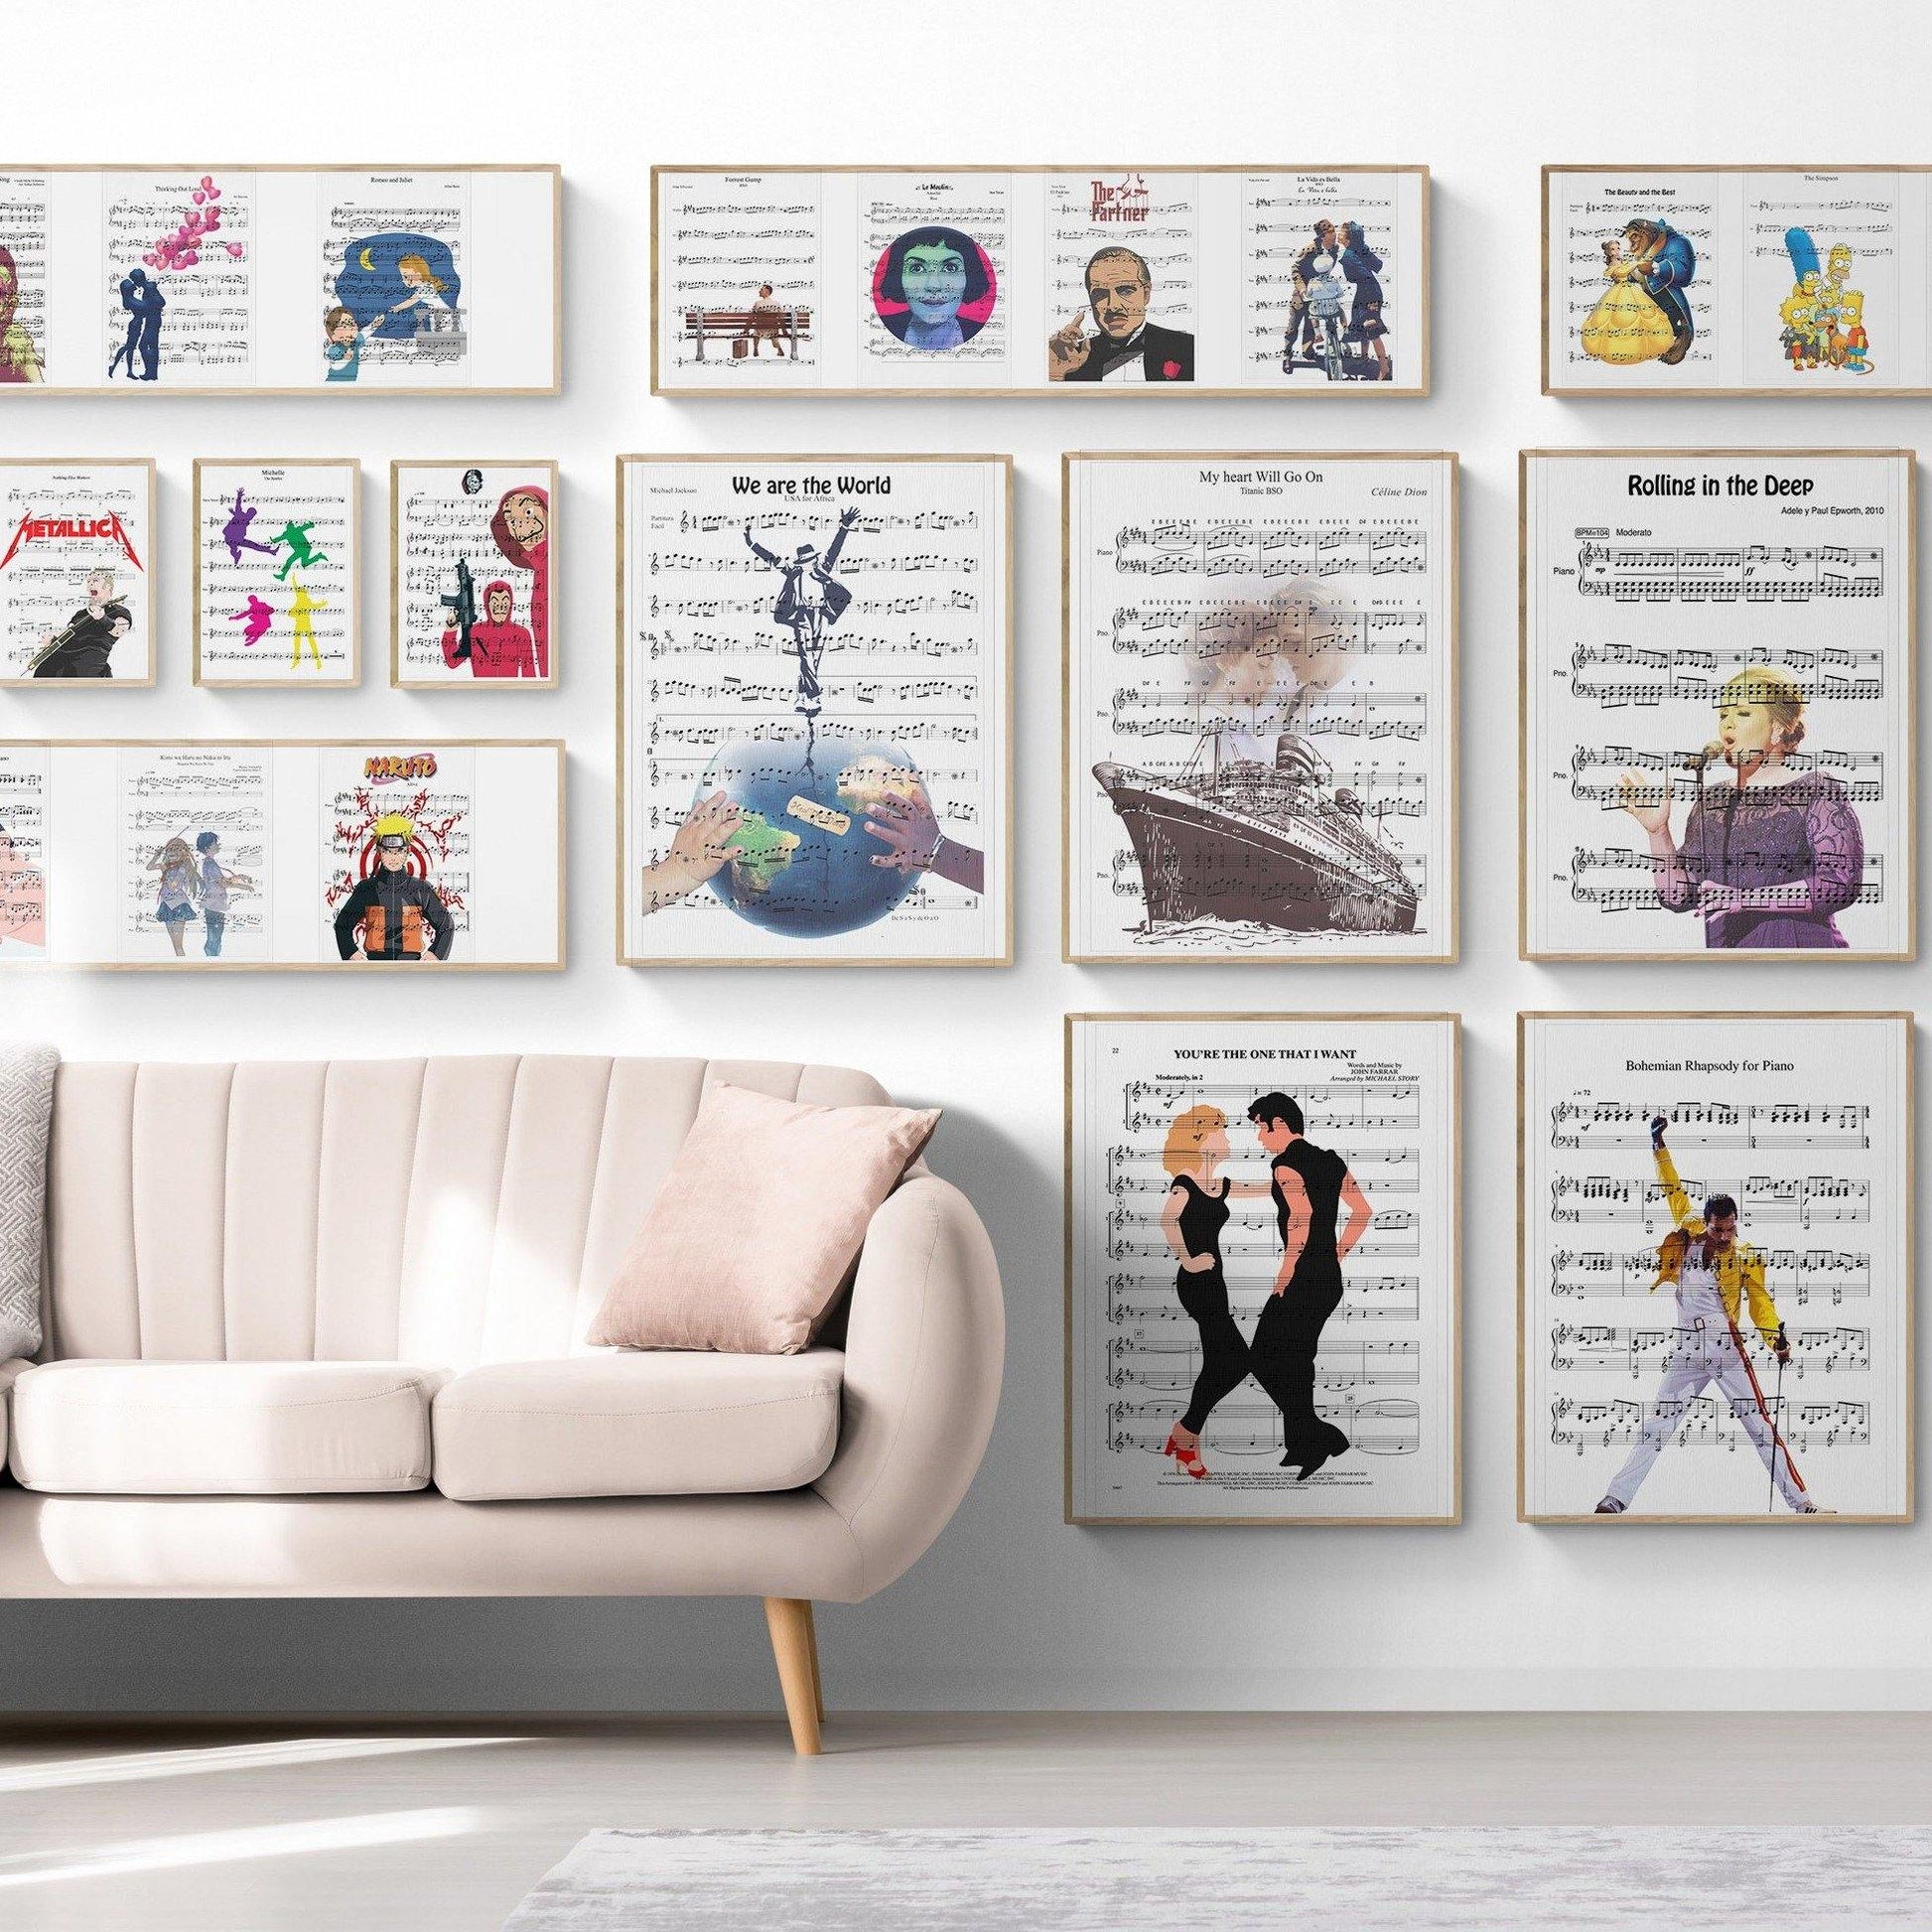 Put your favorite show-stopping lyrics on display with this "A Million Dreams" print! Show off your love of the movie, The Greatest Showman, with this fun and unique piece of wall art. And the best part? You can customise it with your own special message--the perfect gift for a loved one, or a memorable way to commemorate your wedding first dance. So go ahead and make your dreams come true!